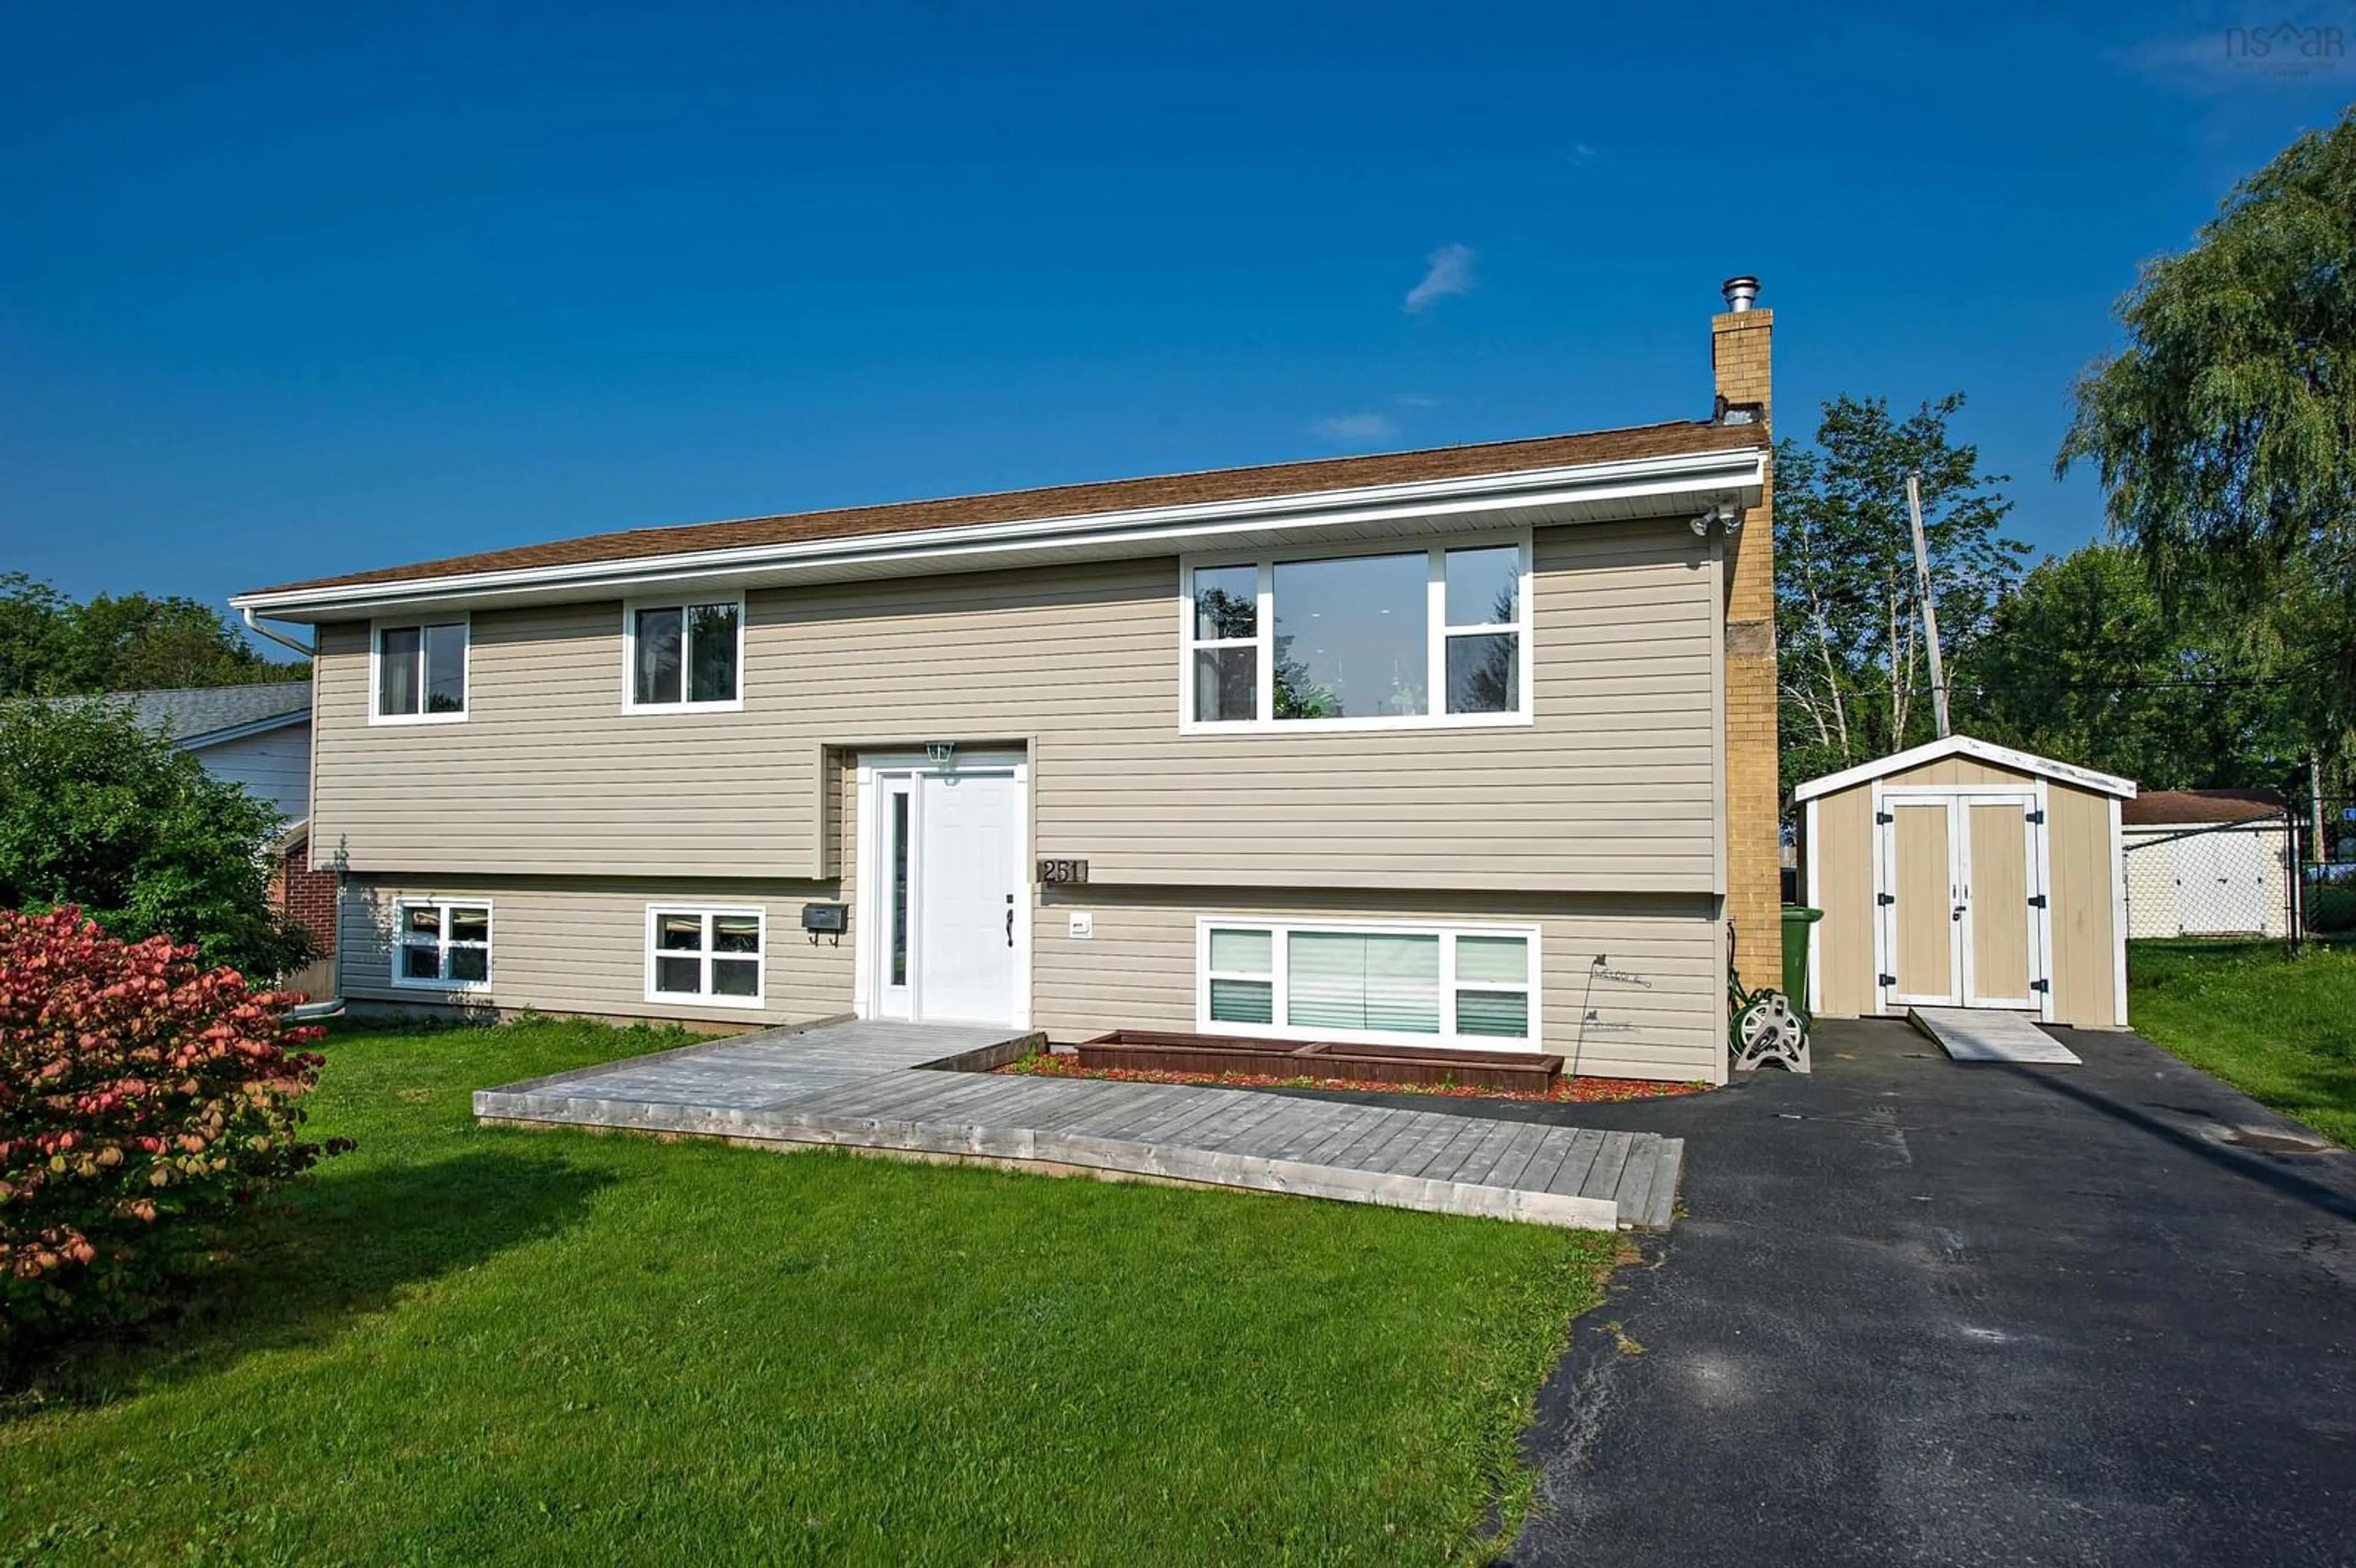 Home with vinyl exterior material for 251 Chandler Dr, Lower Sackville Nova Scotia B4C 1Y4